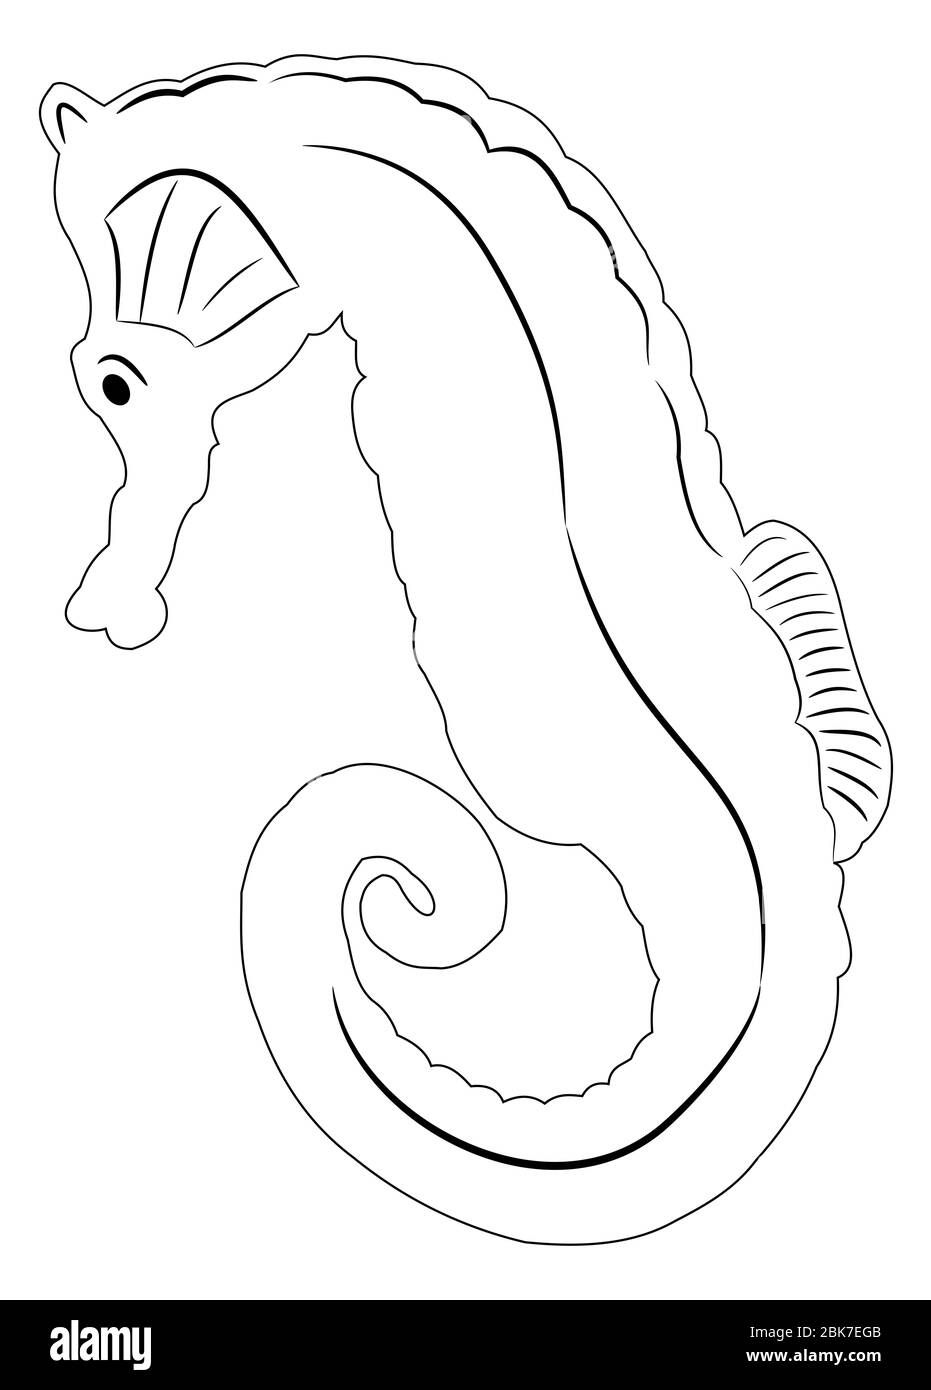 Illustration of sea horse wiyh clear lines ready to be colored and used for some design Stock Photo